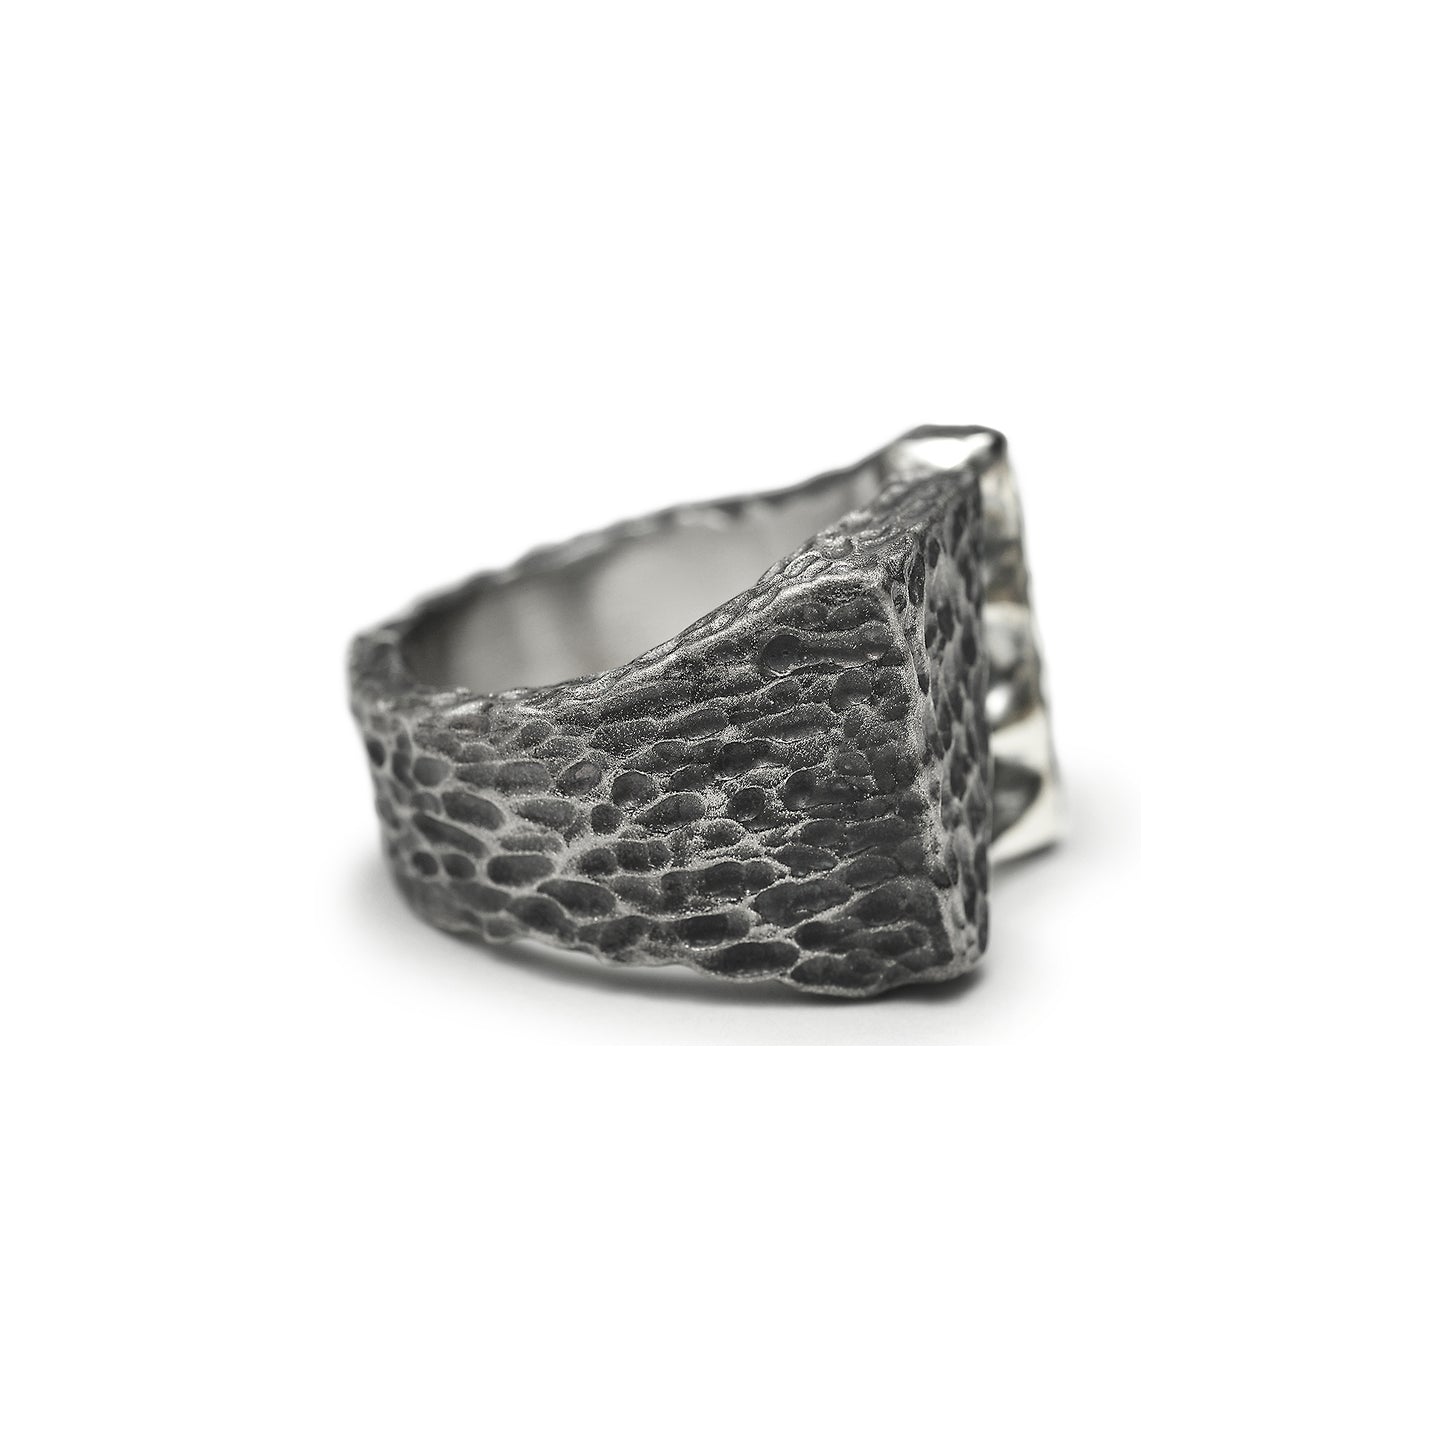 R-97 Eternal - square sterling silver signet ring